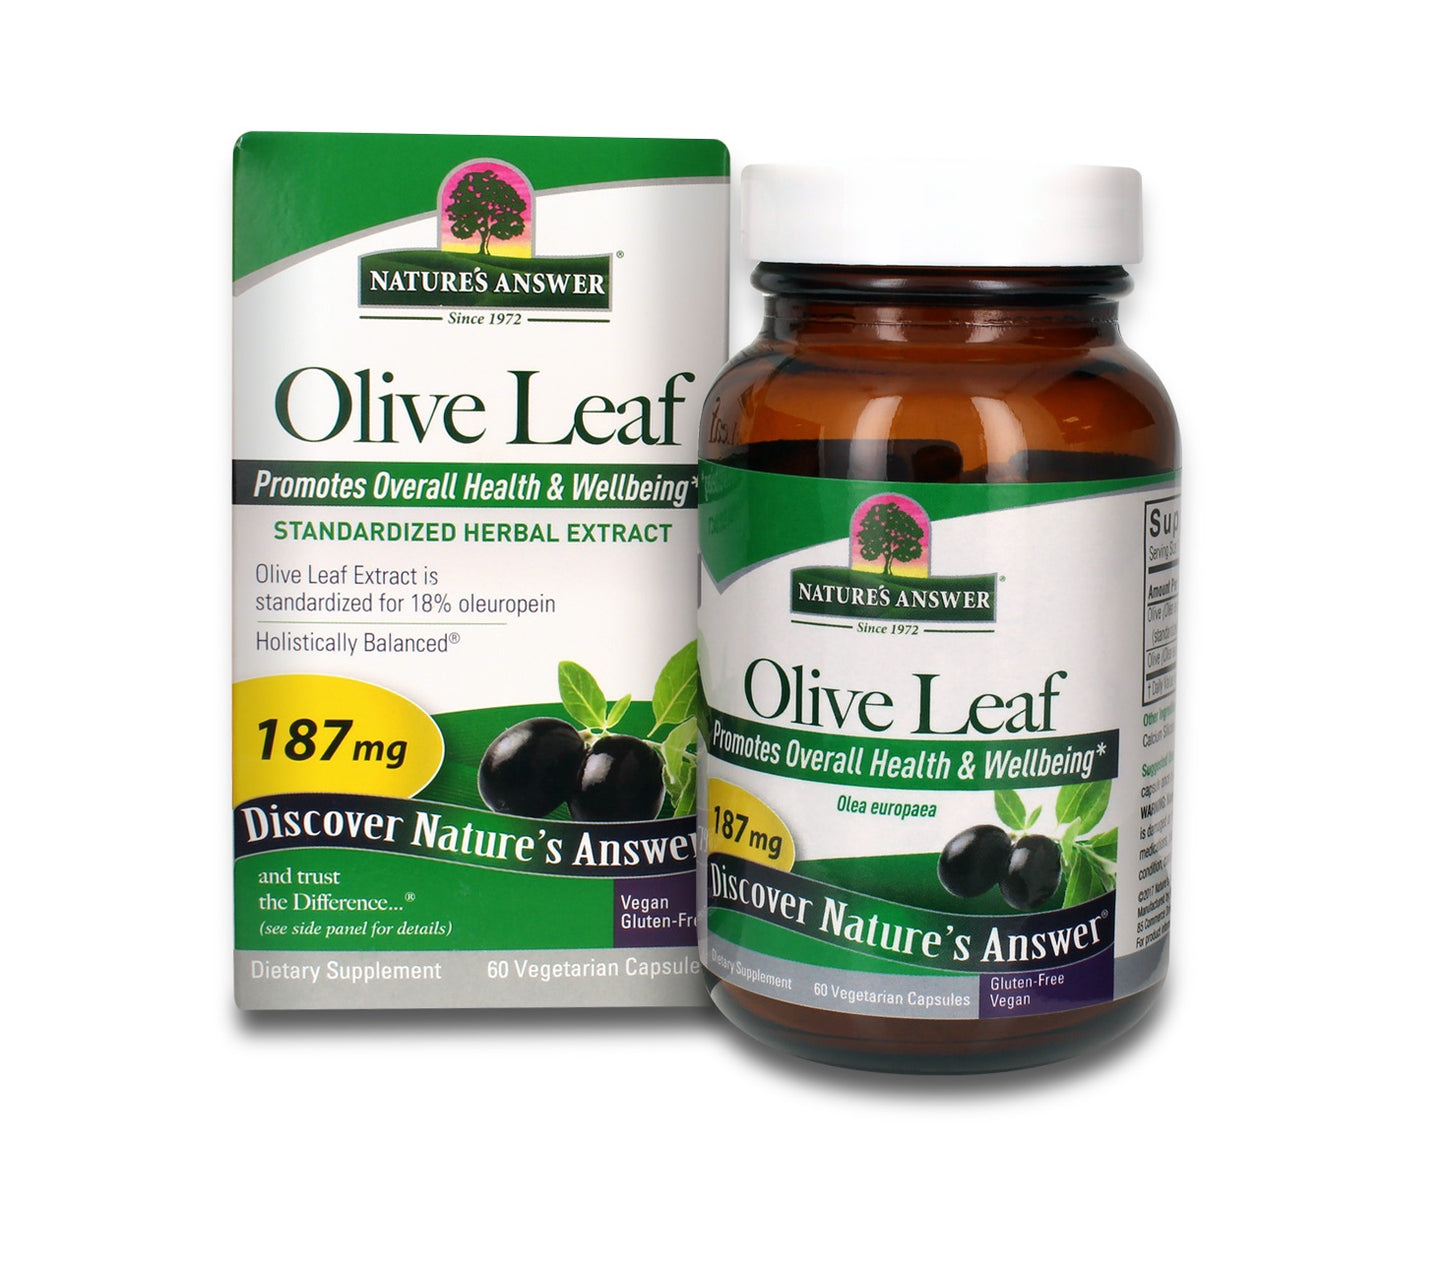 Nature's Answer Olive Leaf Standardized Extract